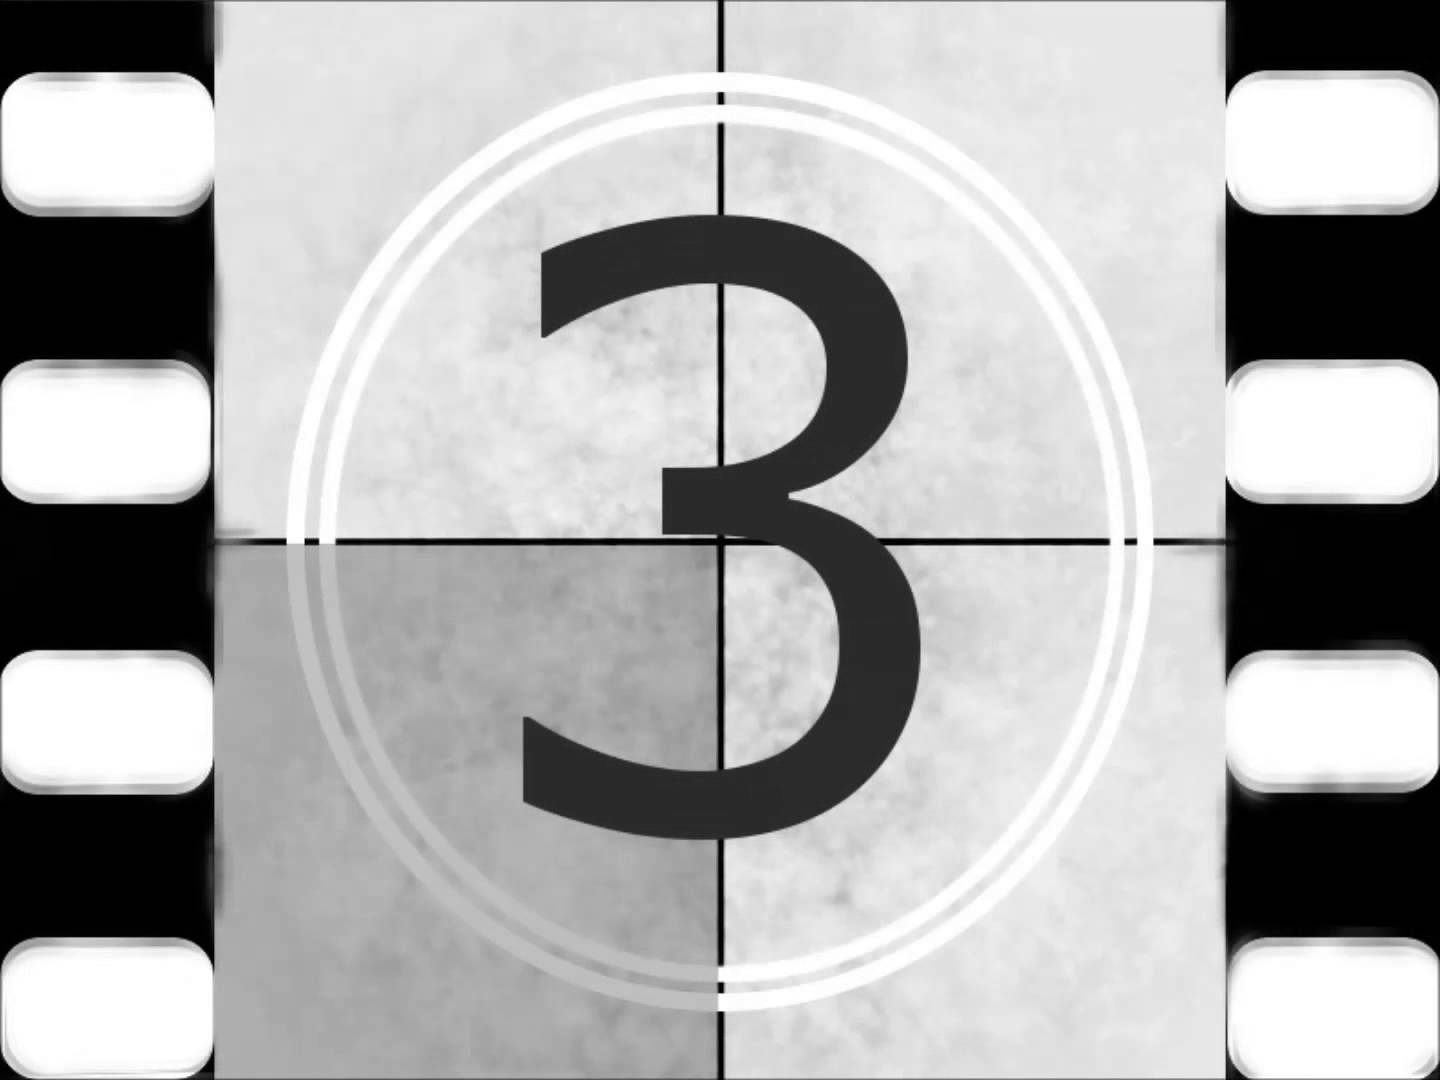 Film Reel 5,4,3,2,1, Countdown-Creative Commons Use - YouTube